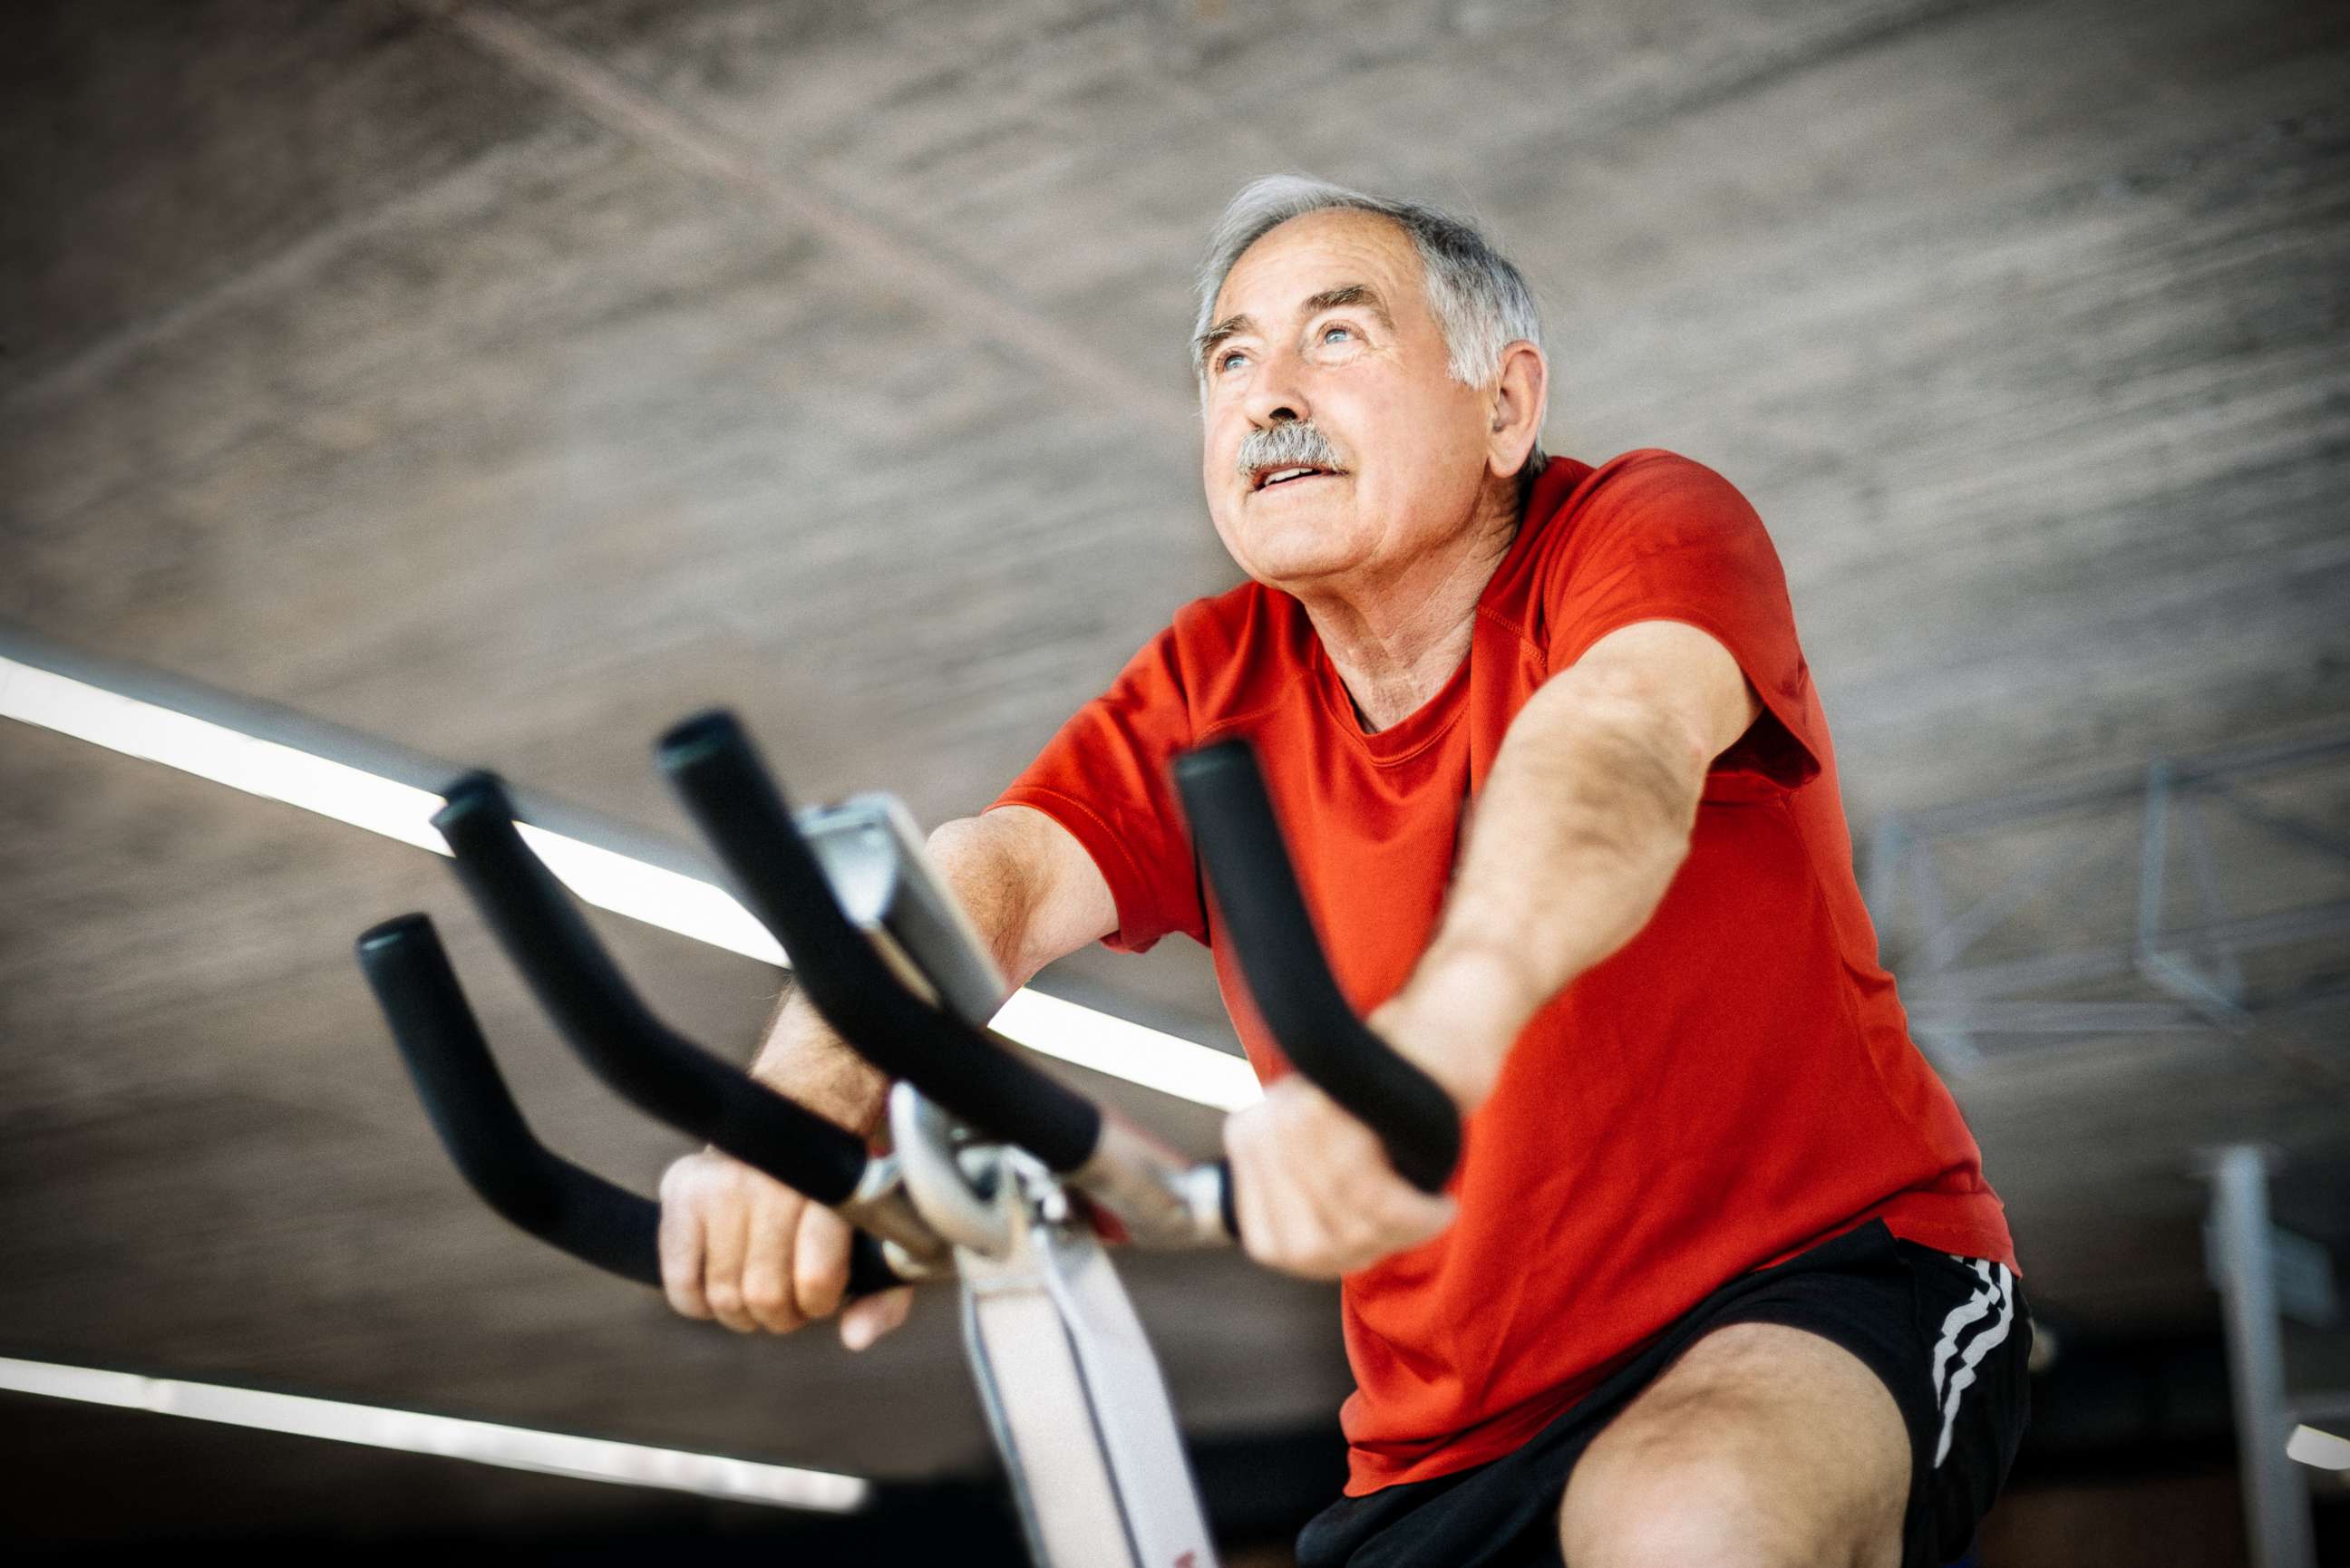 PHOTO: A senior man cycles on a spinning bicycle in a gym in this undated stock photo.